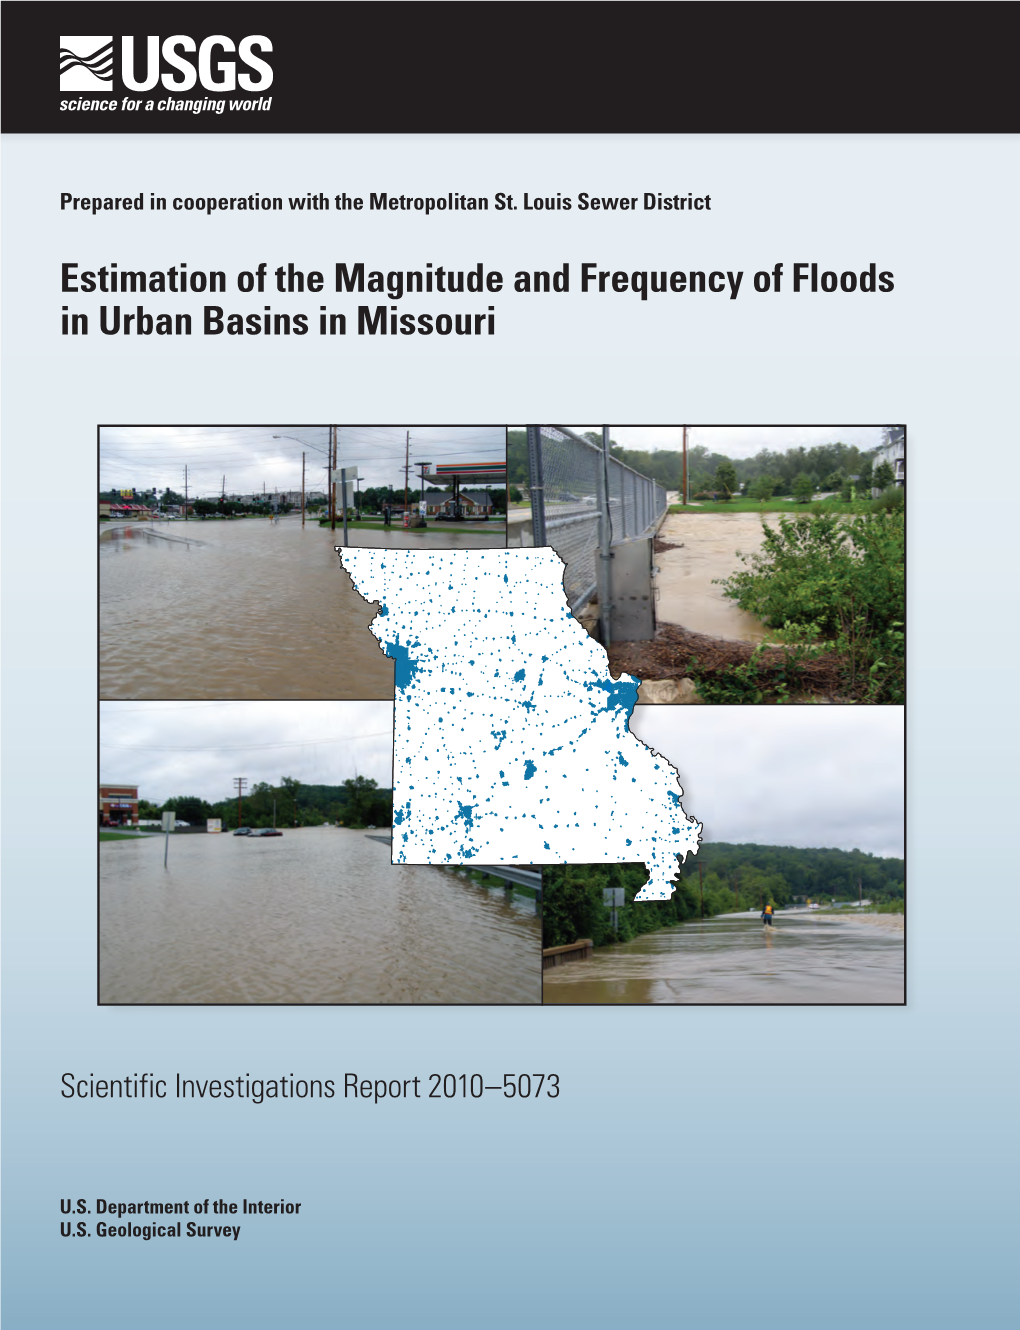 (2010). "Estimation of the Magnitude and Frequency of Floods in Urban